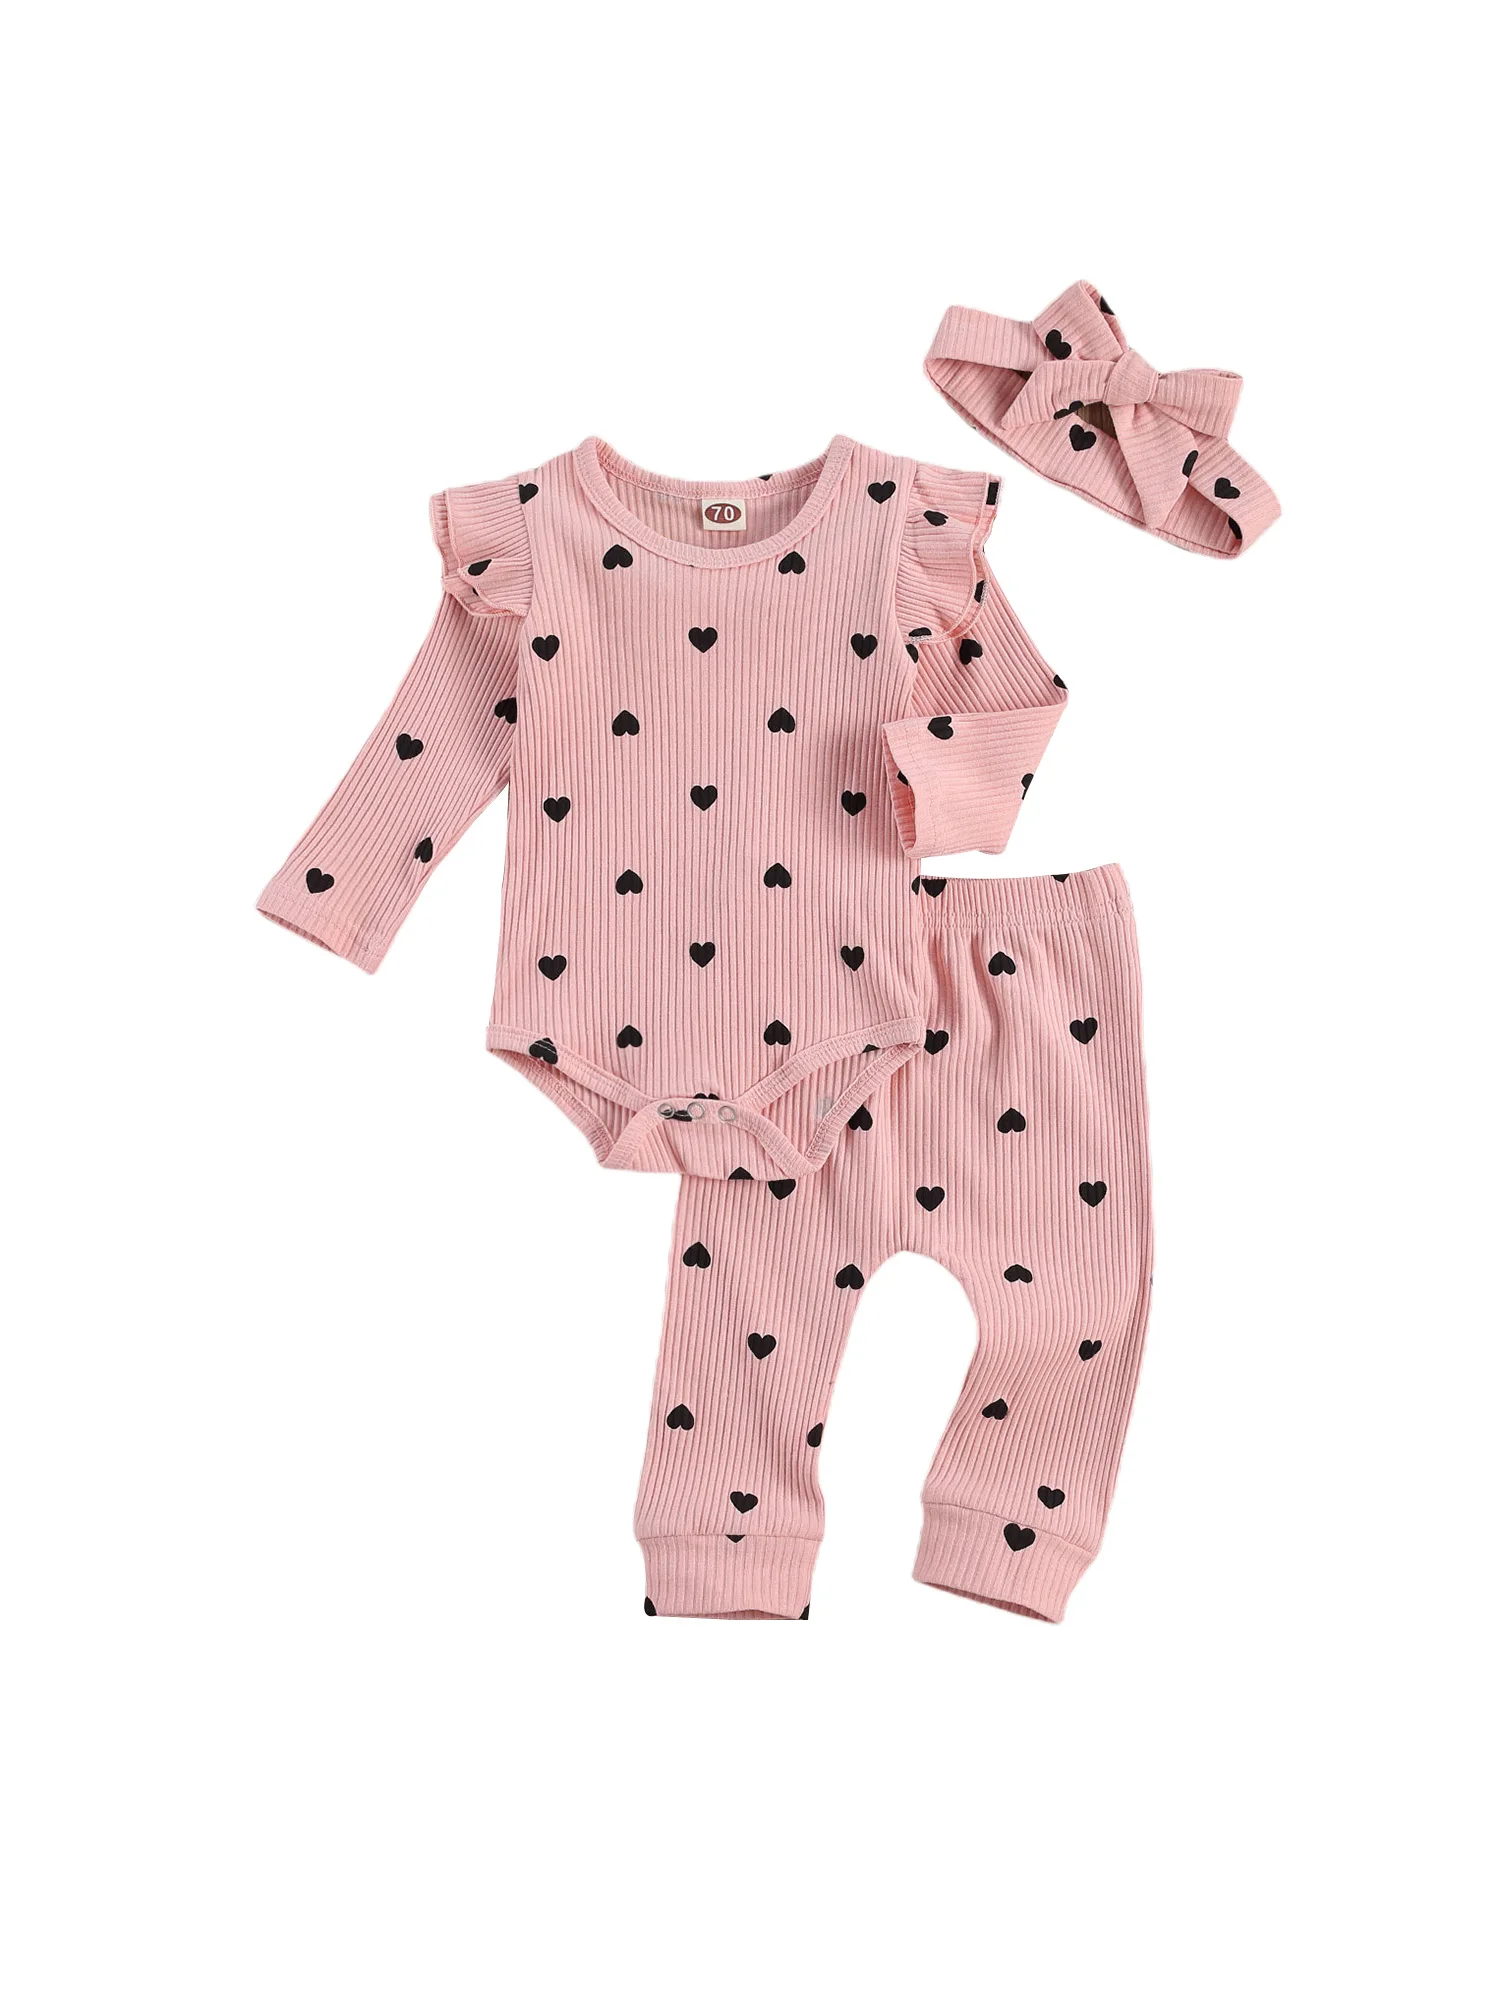 Newborn Baby Girl Ribbed Clothes Set Heart Print Crew Neck Lace Long Sleeve Top Long Pants and Hairband 3-piece Suits Baby Clothing Set discount Baby Clothing Set